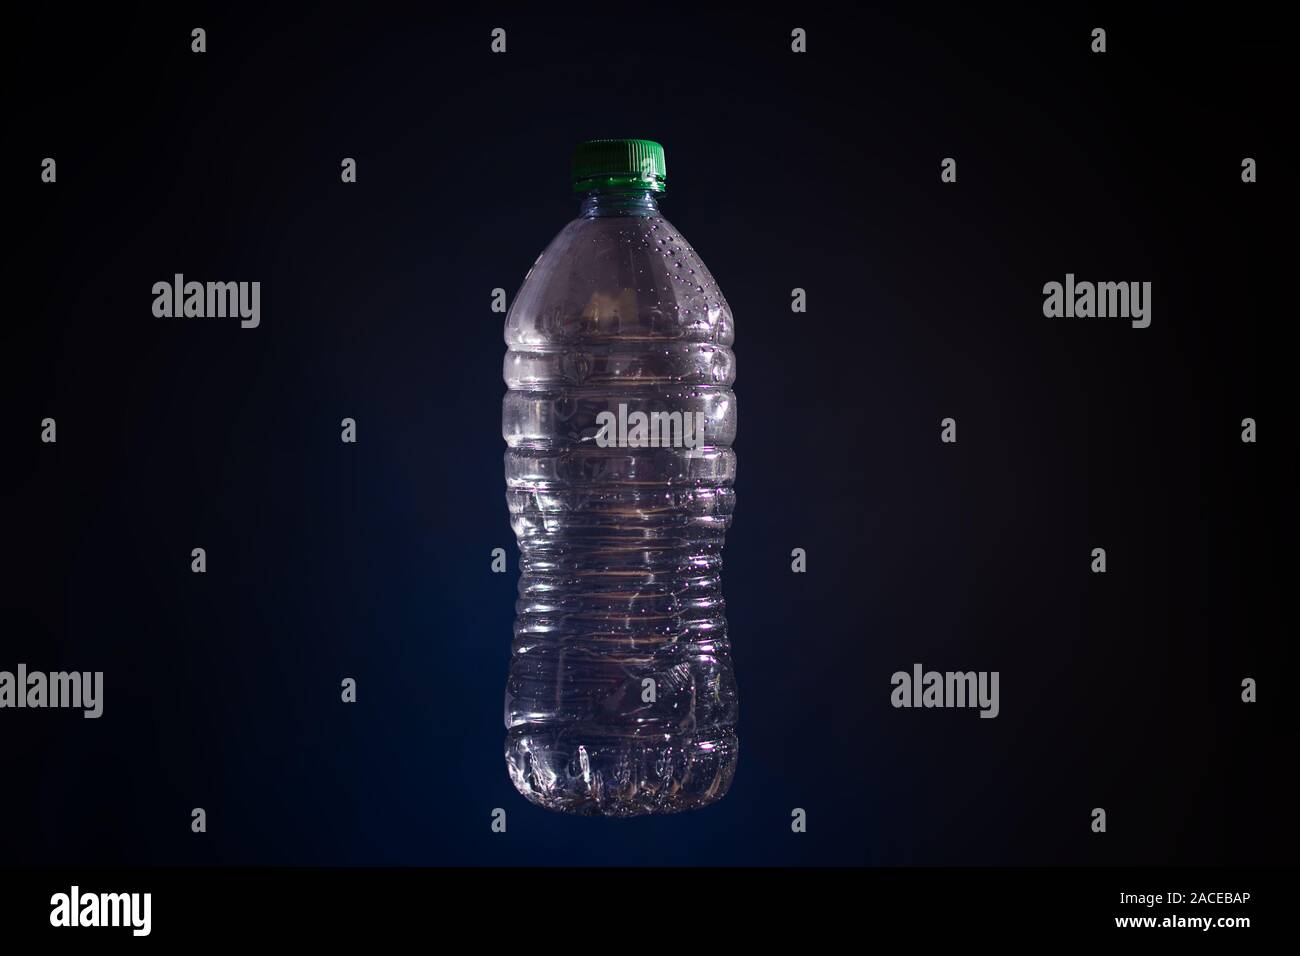 Silhouette of transparent plastic bottle used on dark background Stock Photo